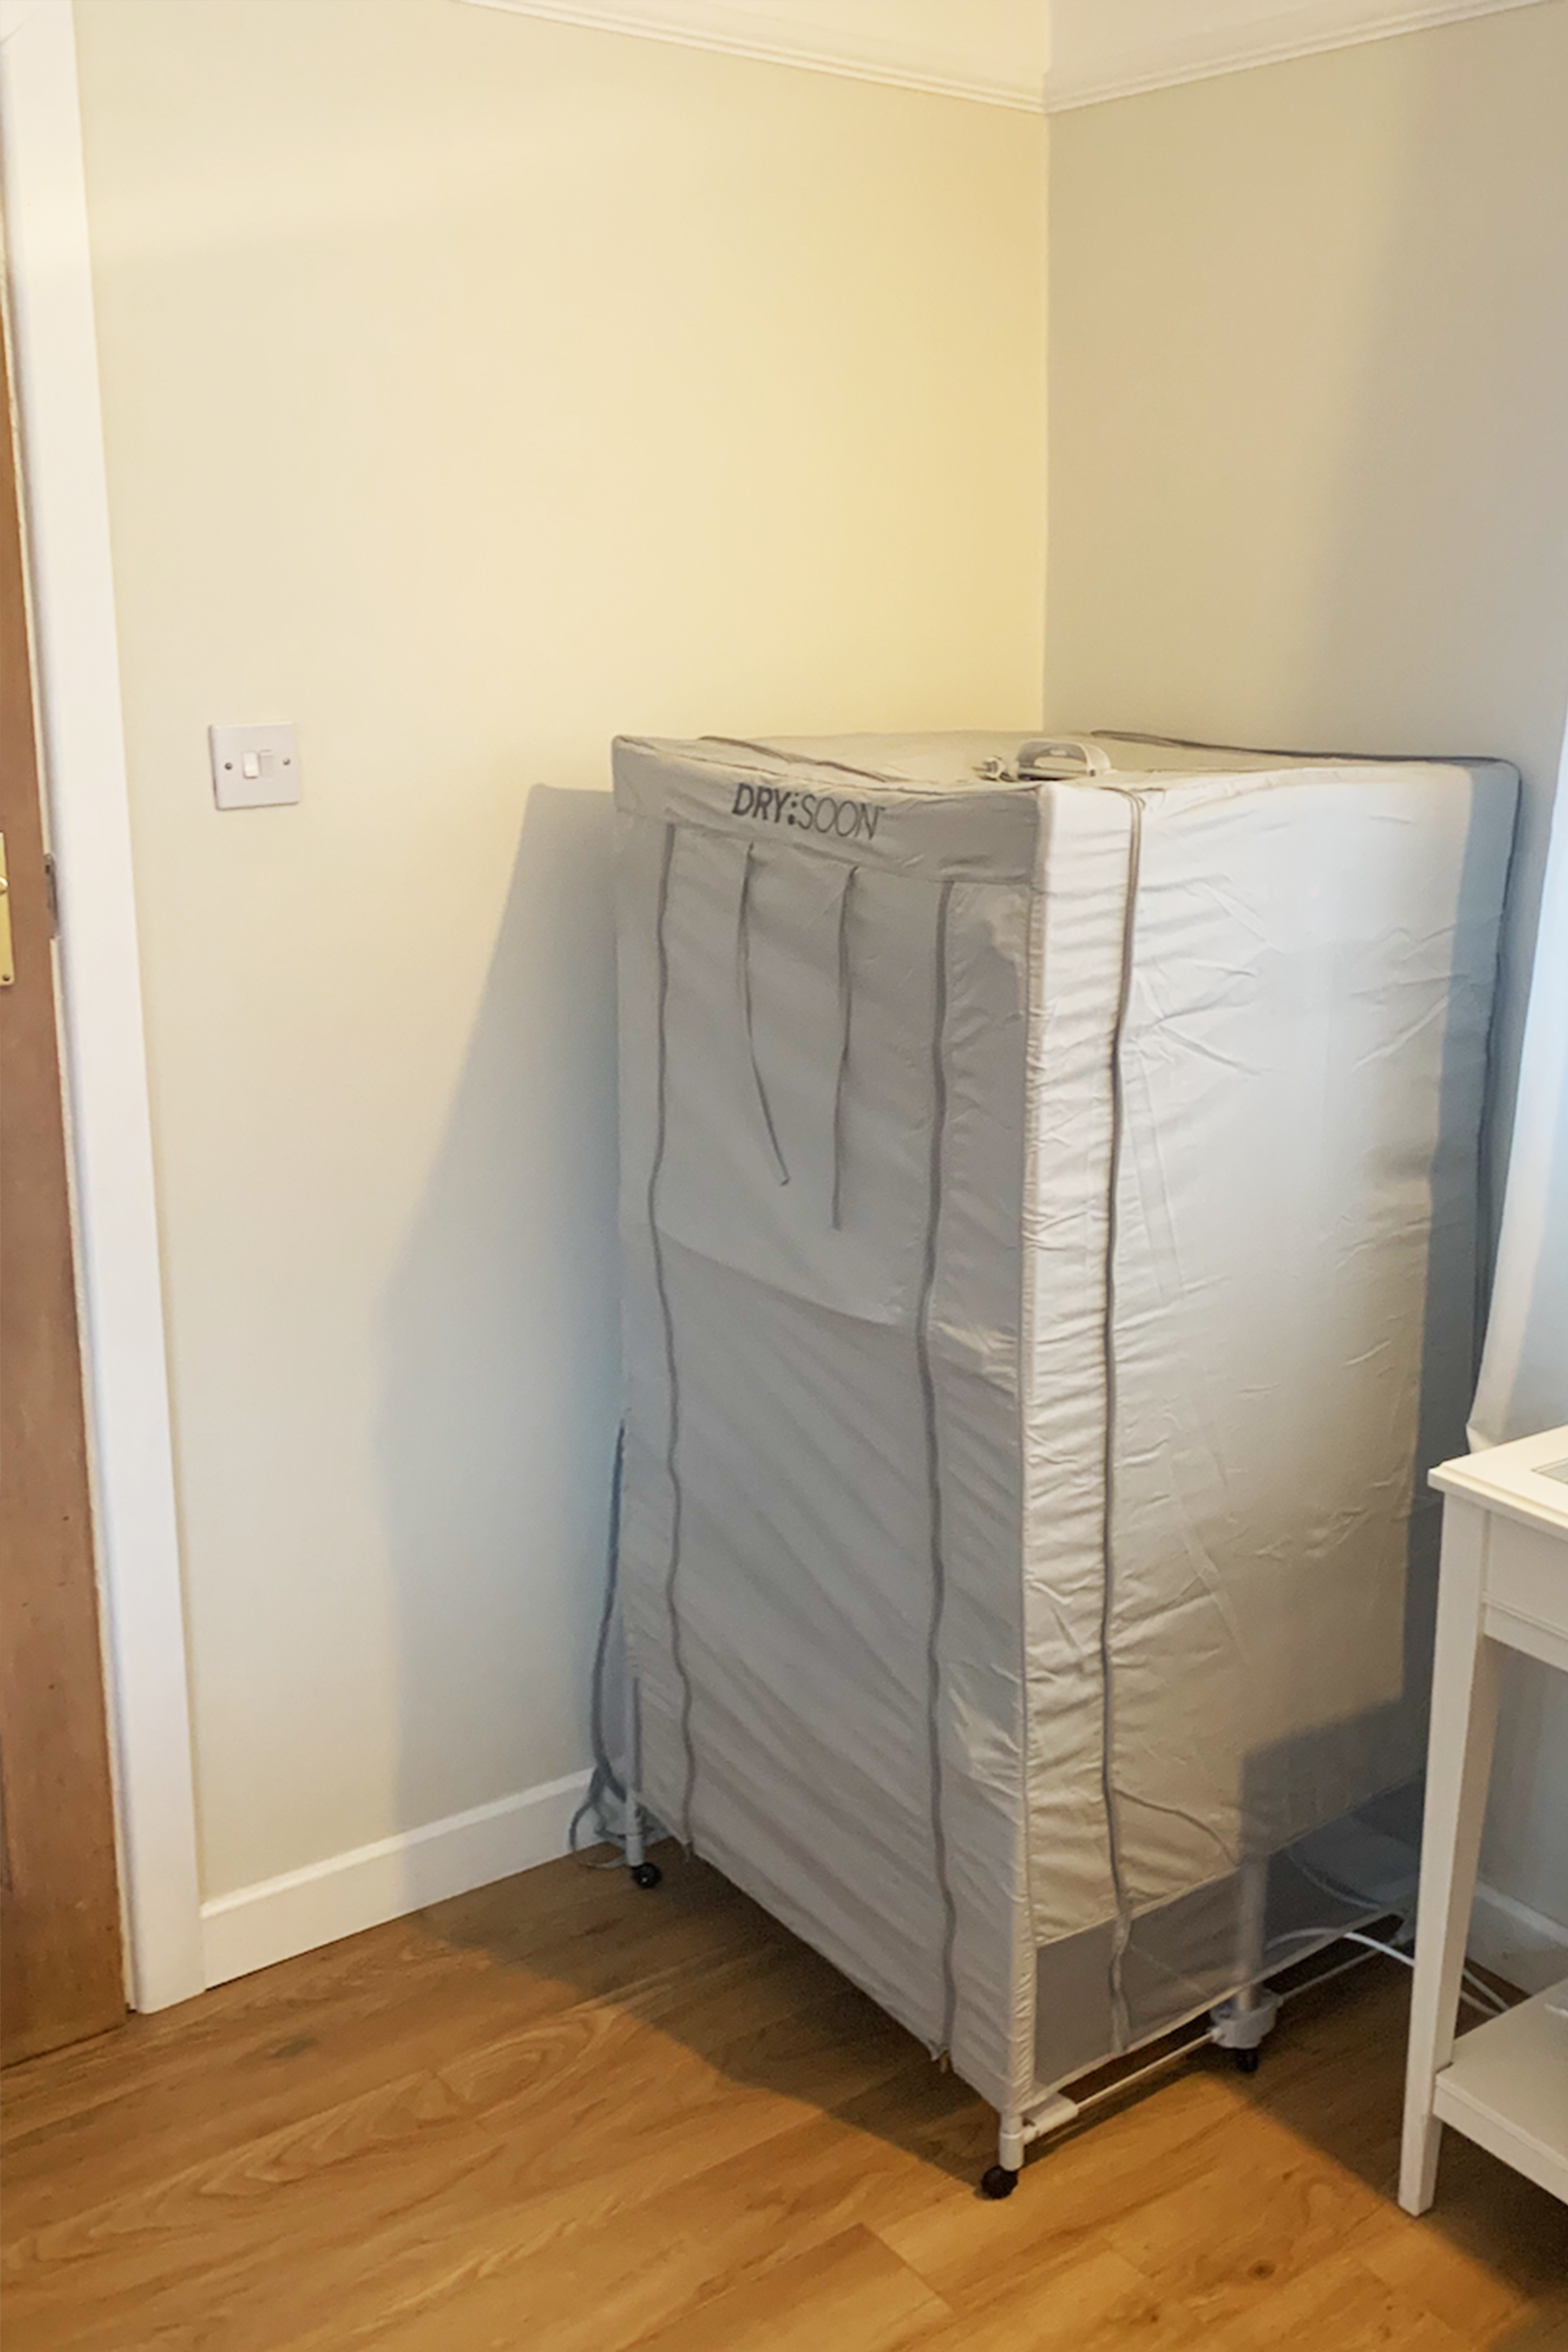 Dry soon heated airer review